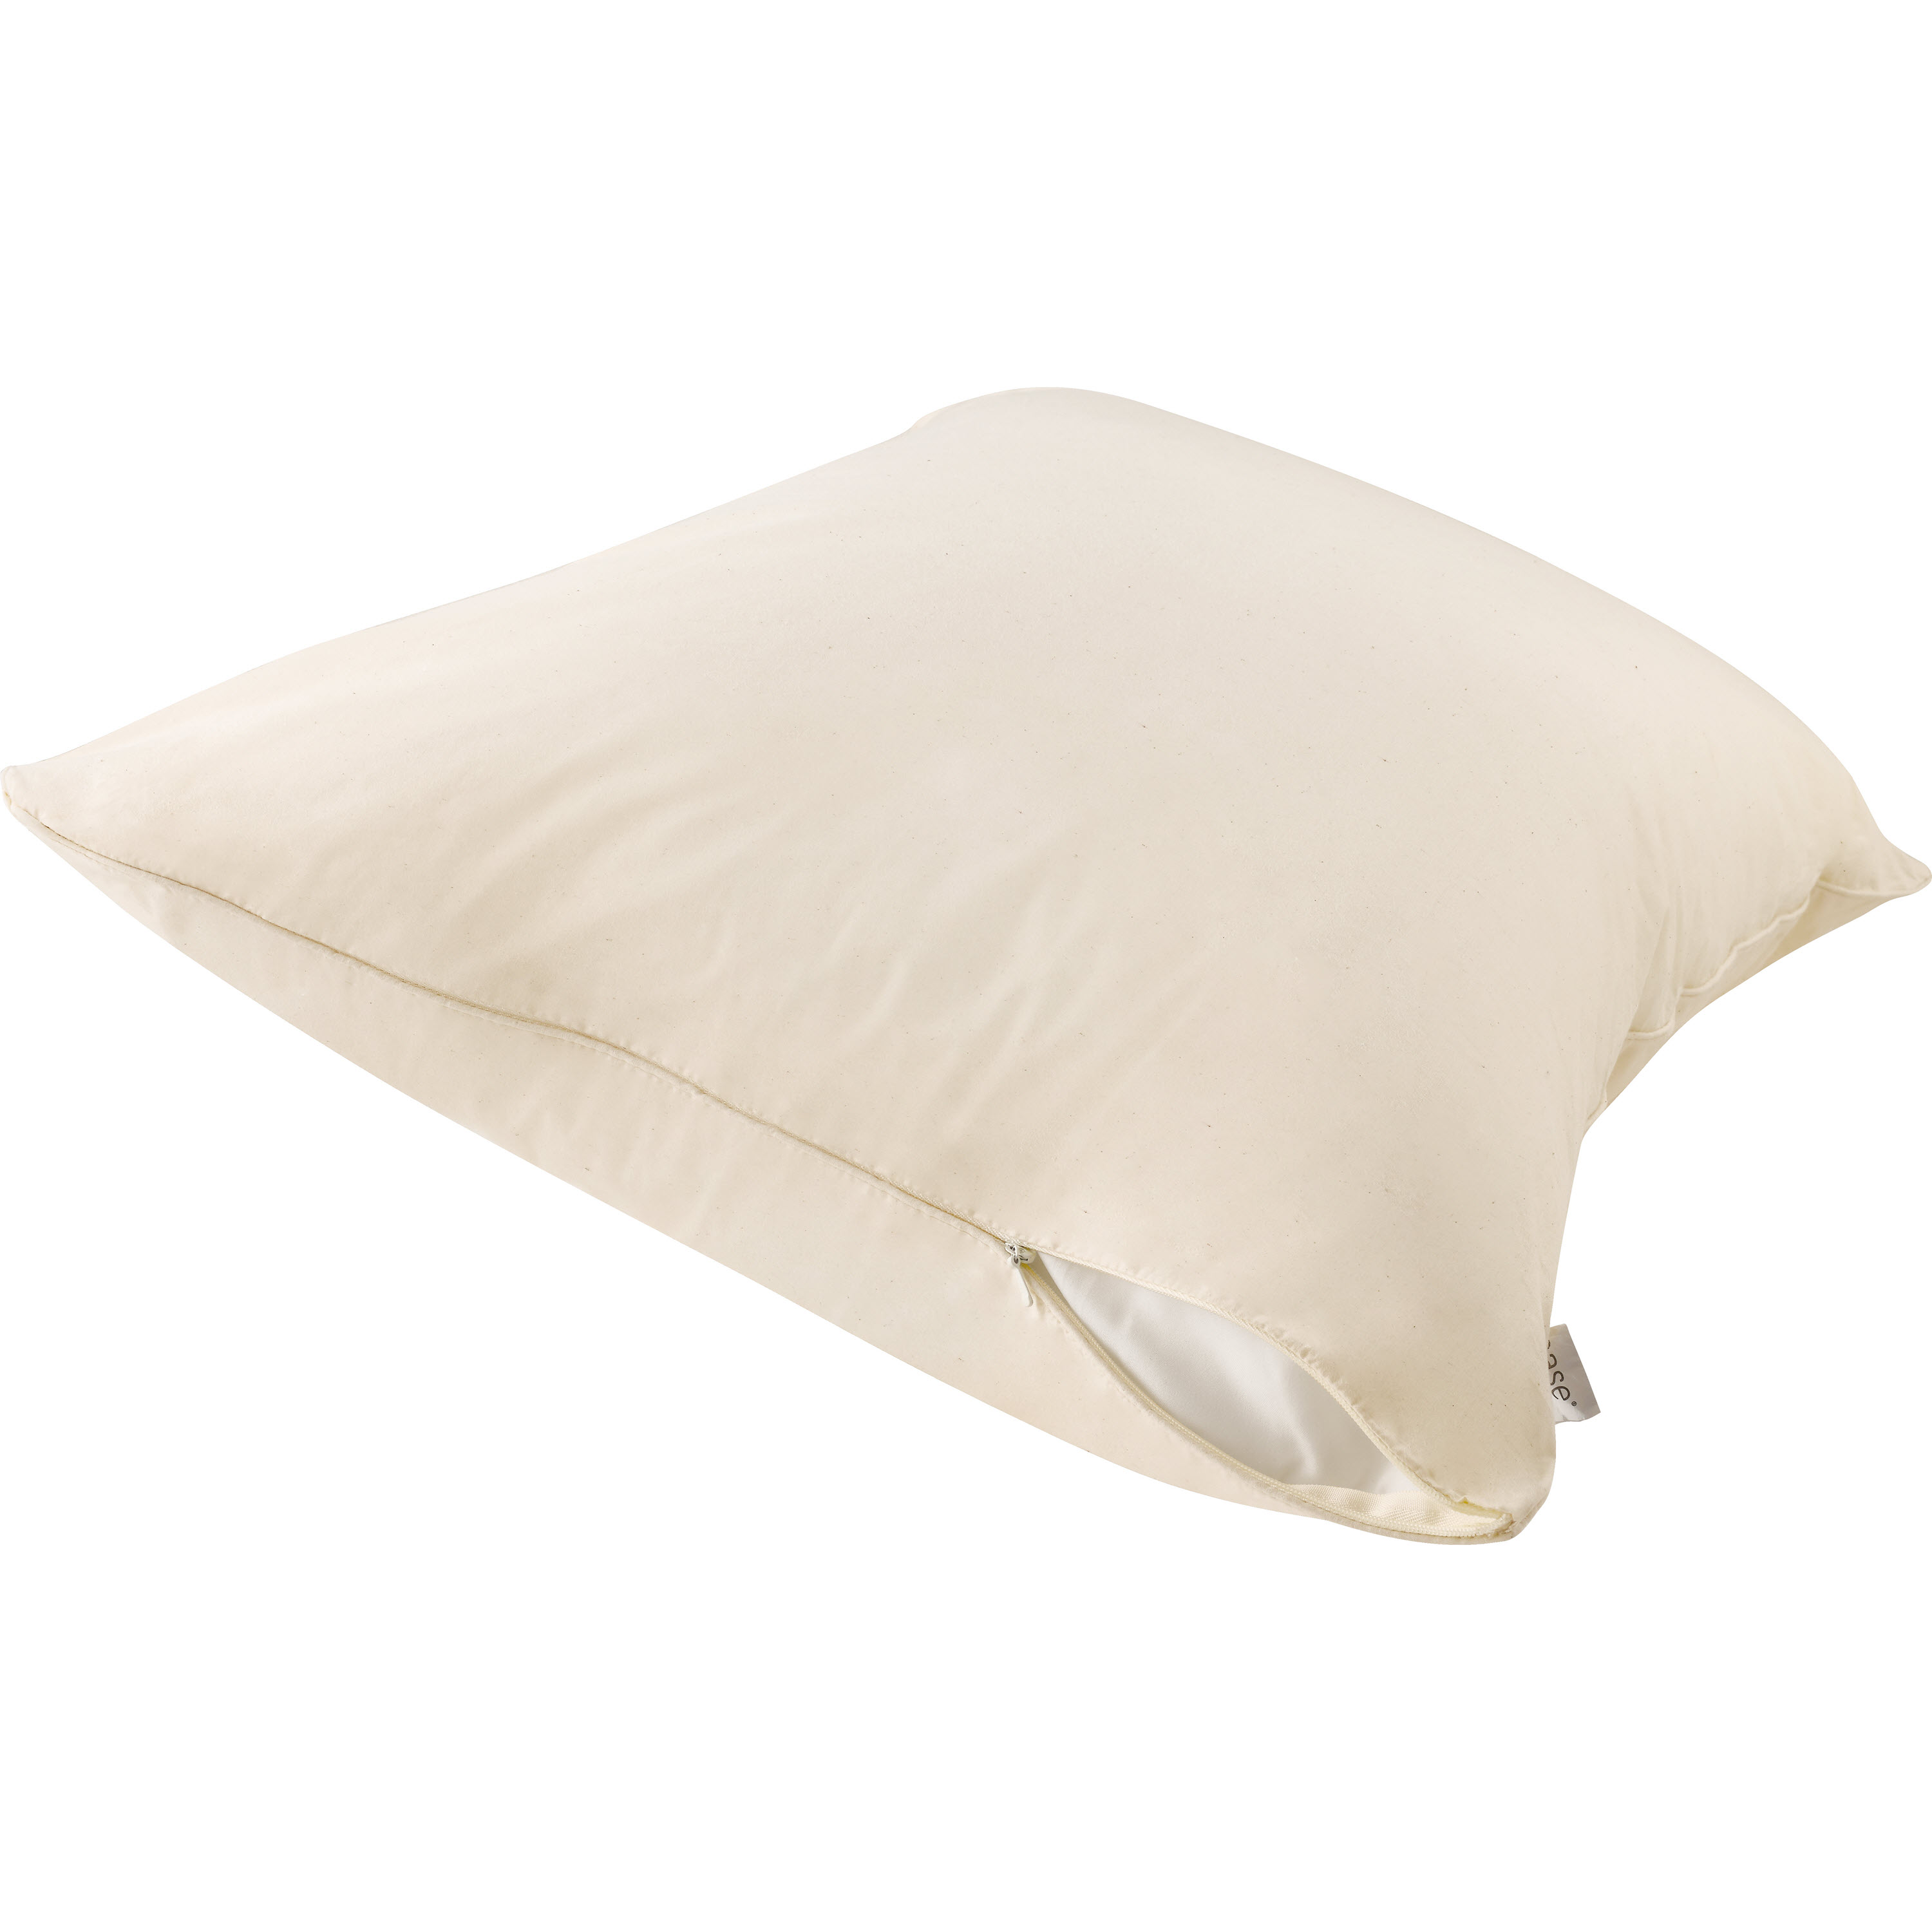 Allerease Organic Cotton Zippered Pillow Protector, Standard/Queen - image 5 of 7